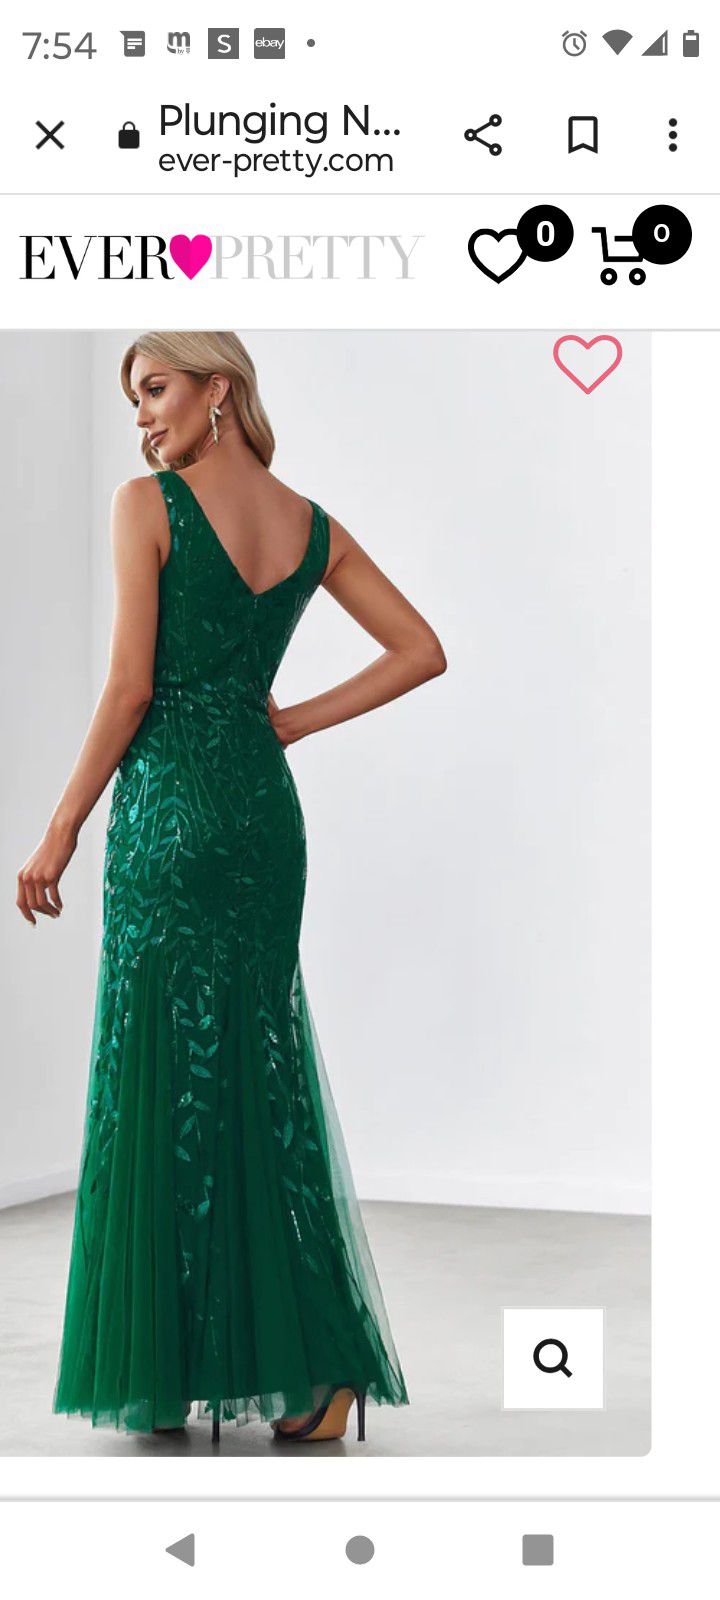 Dresses for Prom, Homecoming, Evenings and More – Camille La Vie